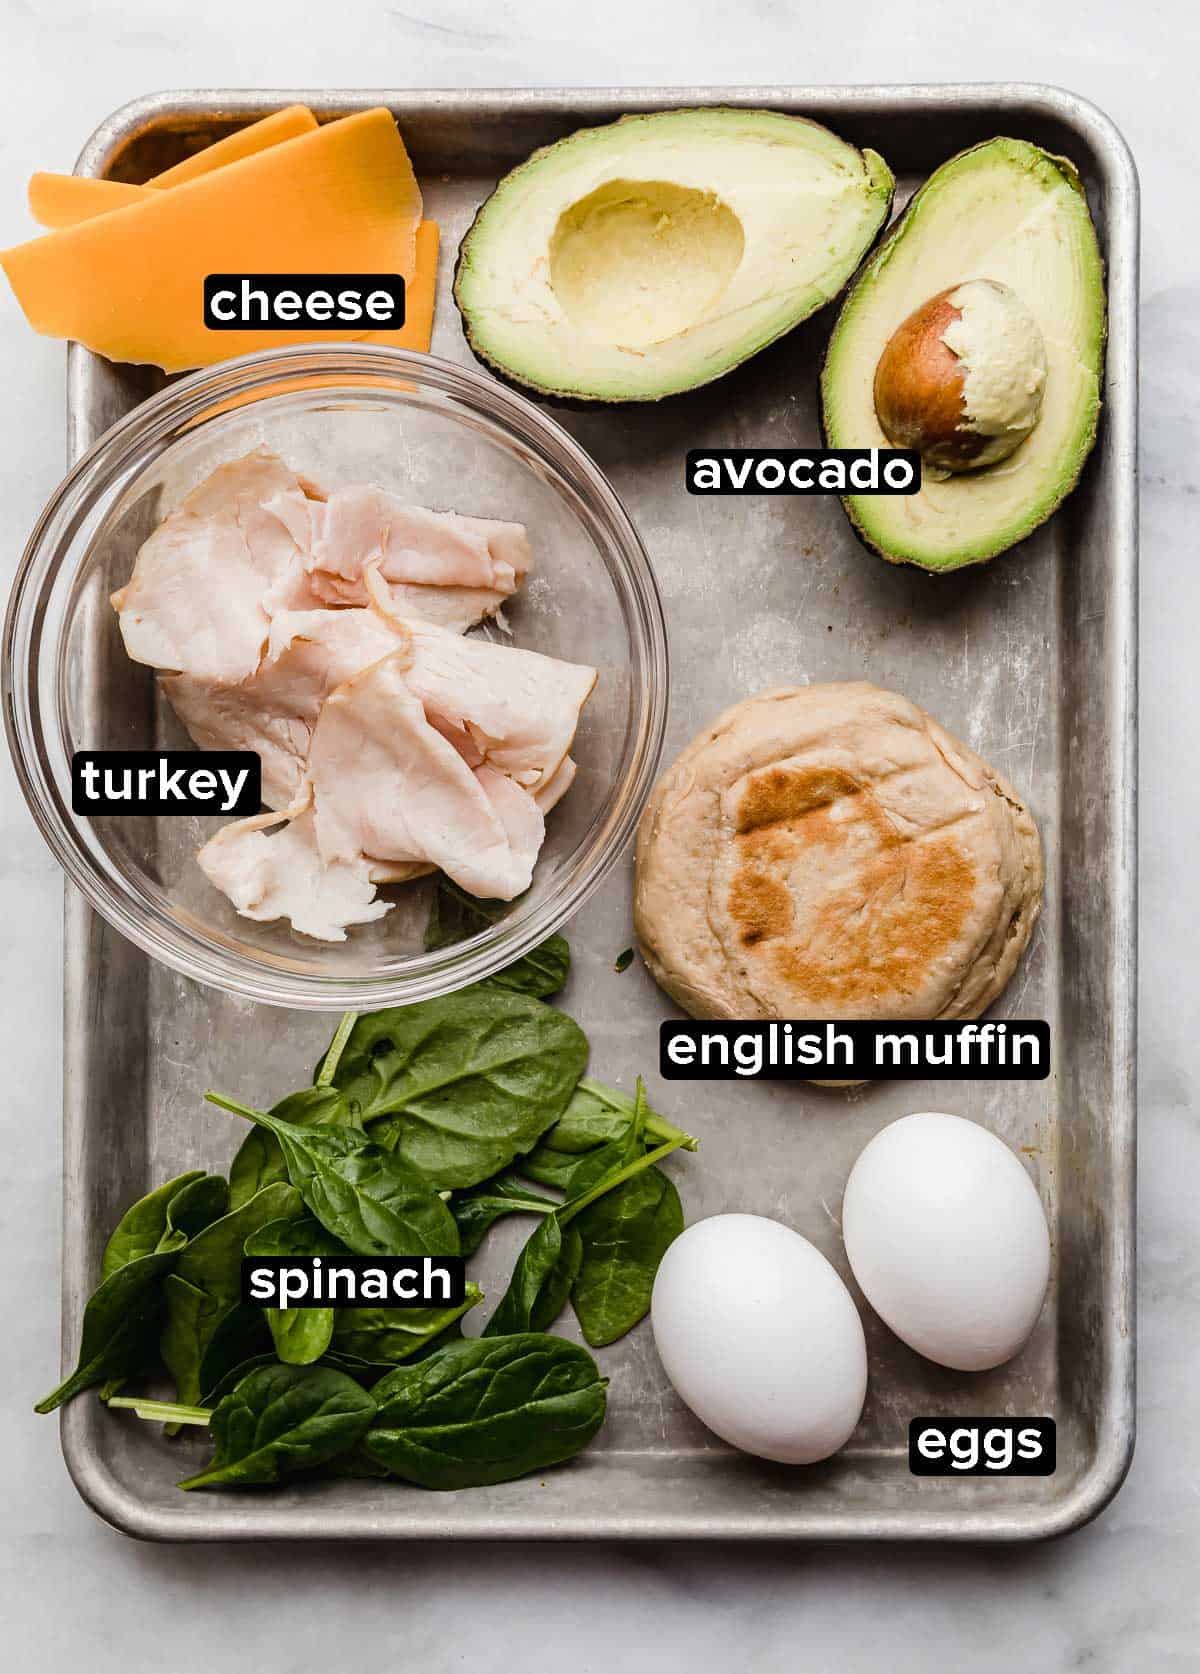 Turkey Breakfast Sandwich ingredients on a baking sheet: deli turkey meat, spinach, avocado, cheese, eggs, and English muffin.